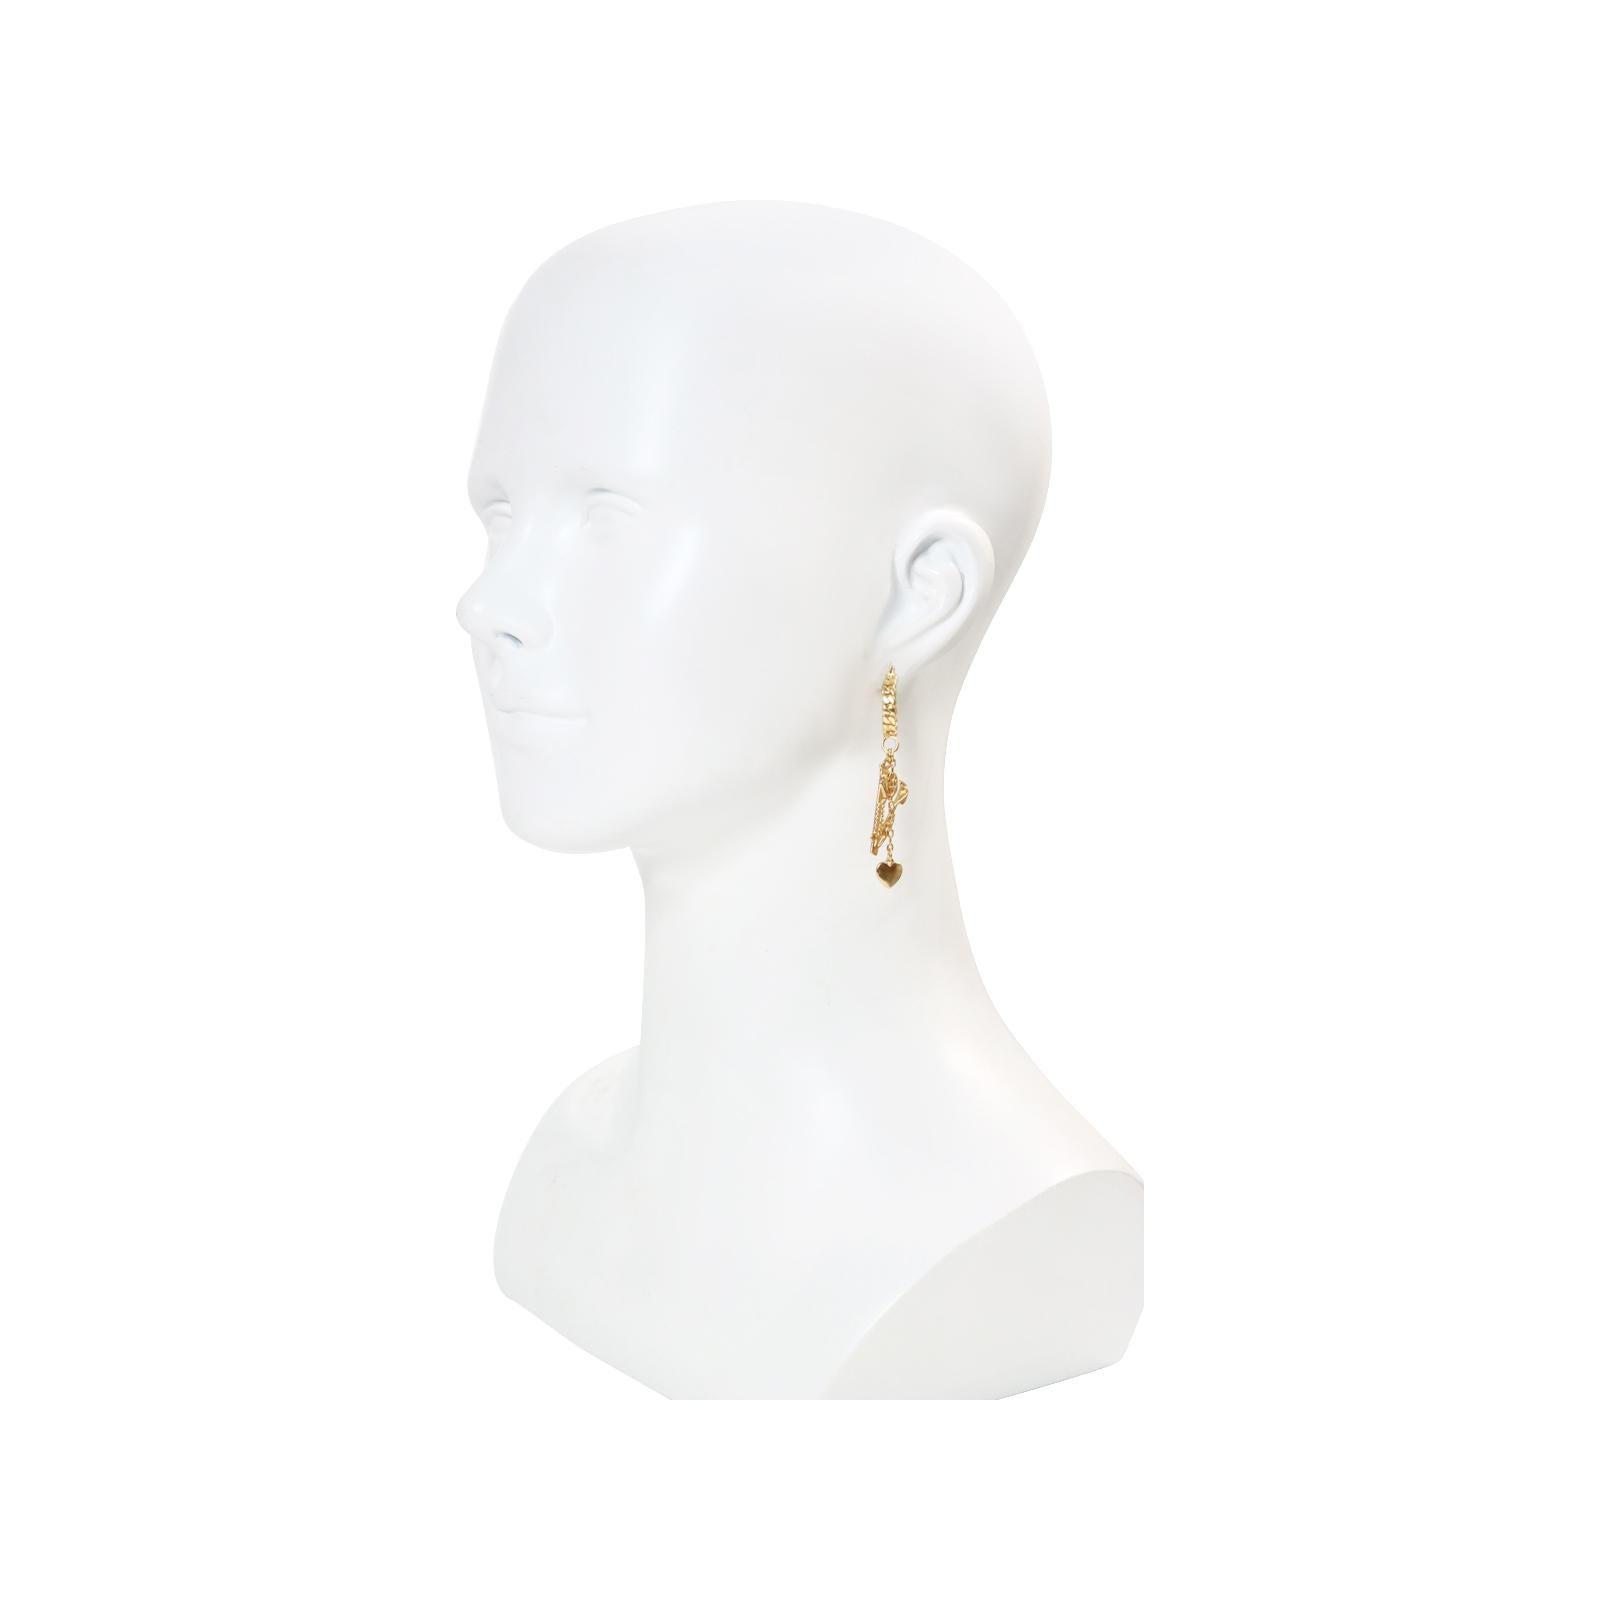 Vintage Versace Gold Tone Dangling Pieces Hoop Earring Circa 2000s For Sale 2